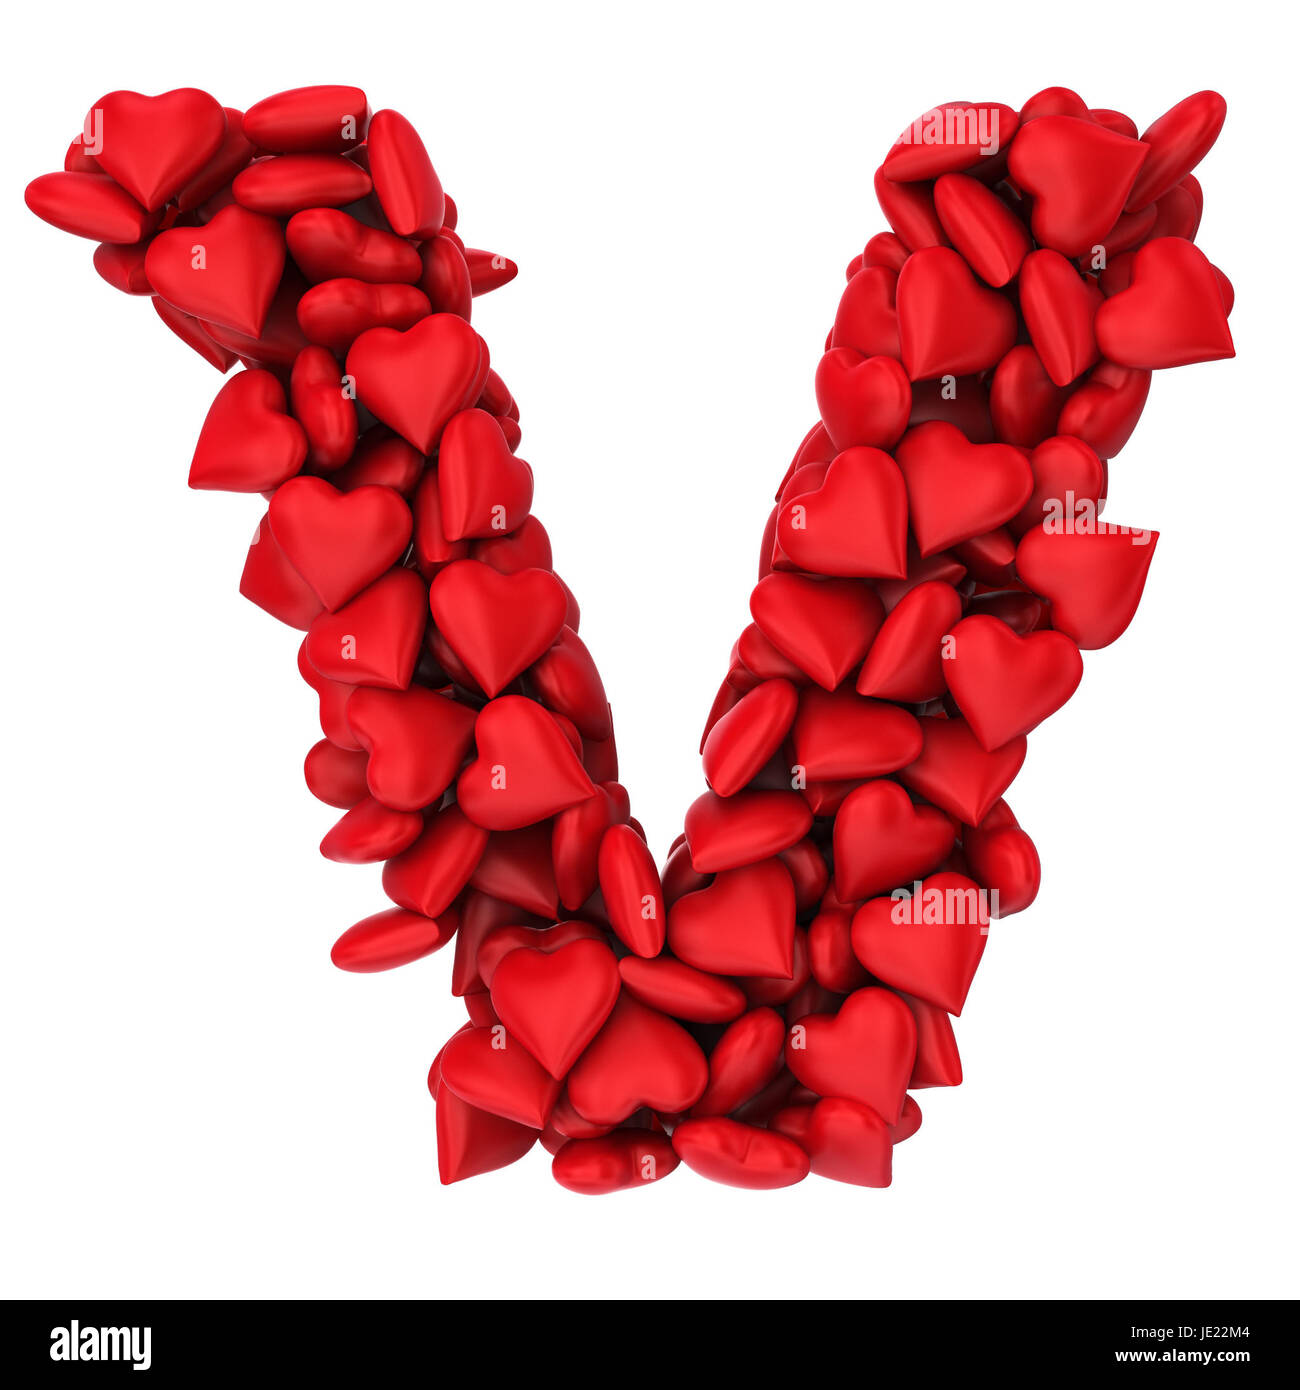 4,573 Heart Letter V Images, Stock Photos, 3D objects, & Vectors